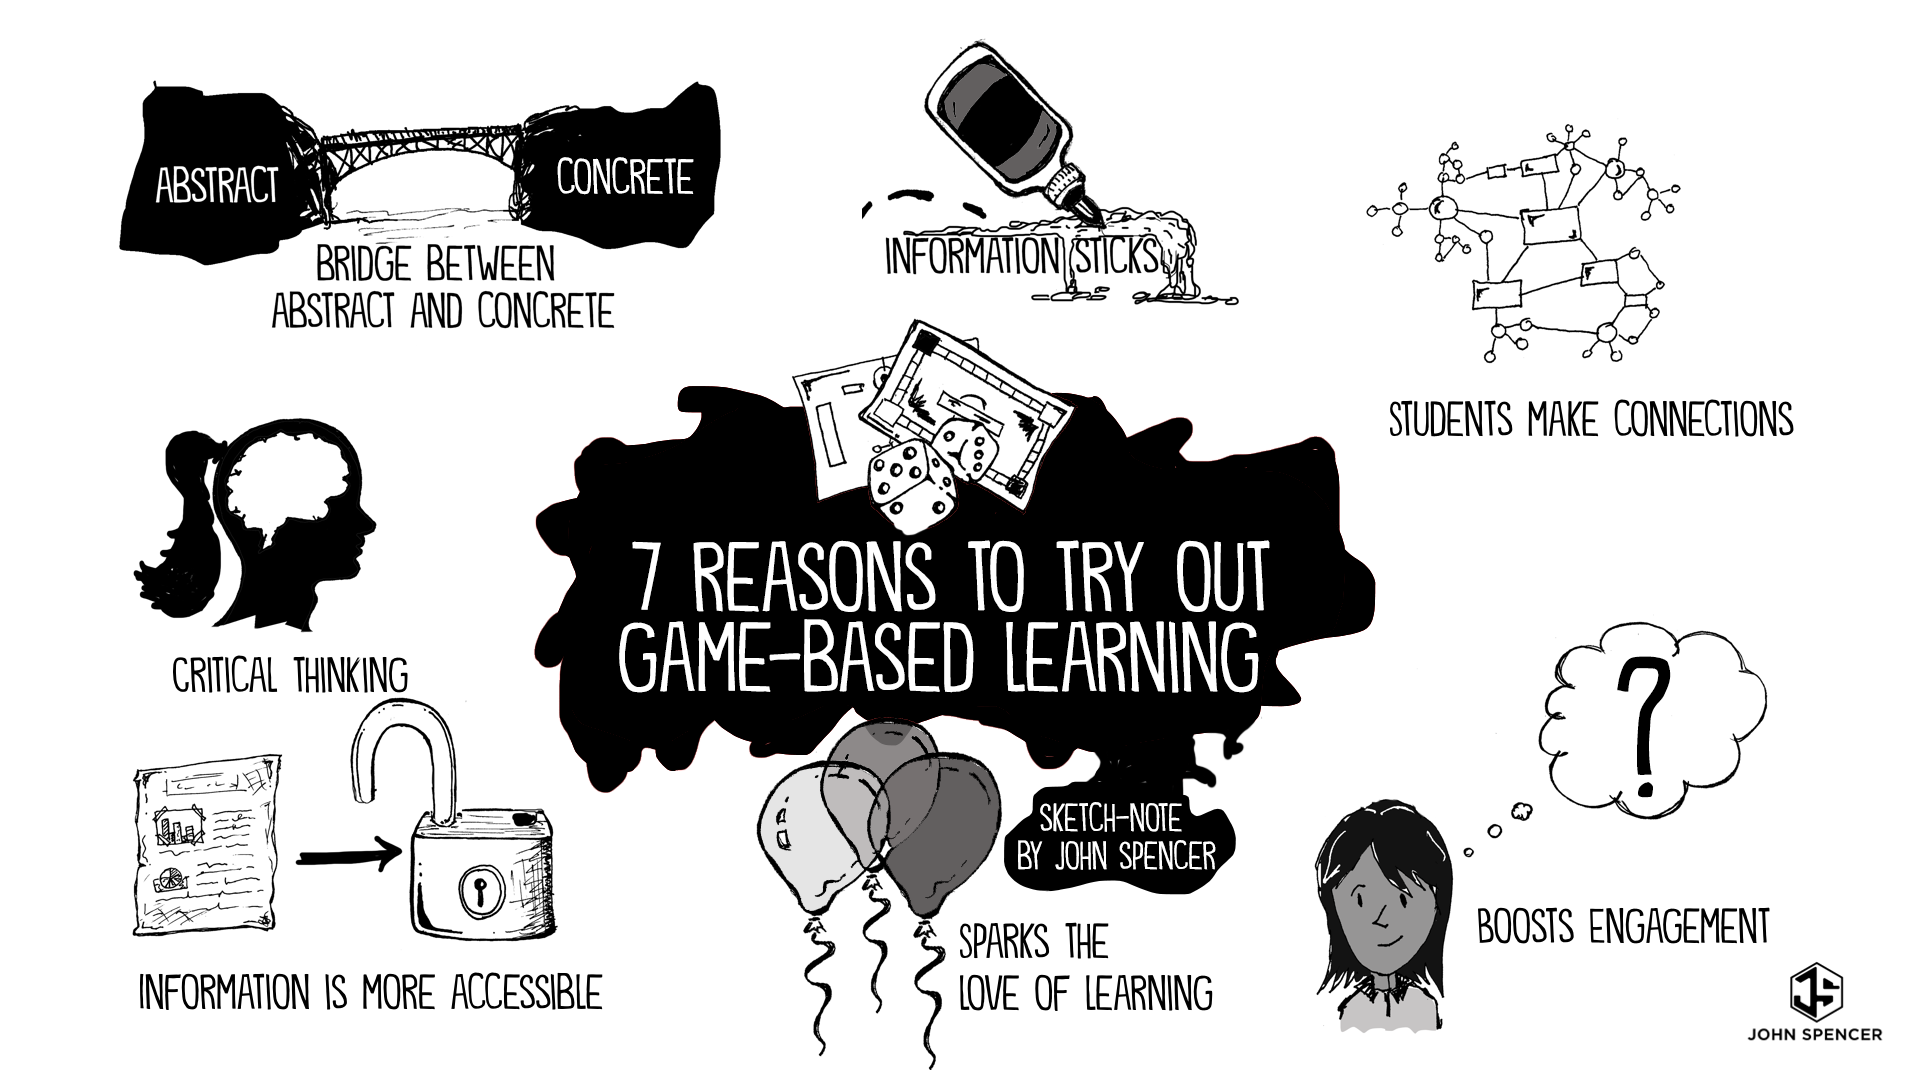 Seven Reasons to Pilot a Game-Based Learning Unit